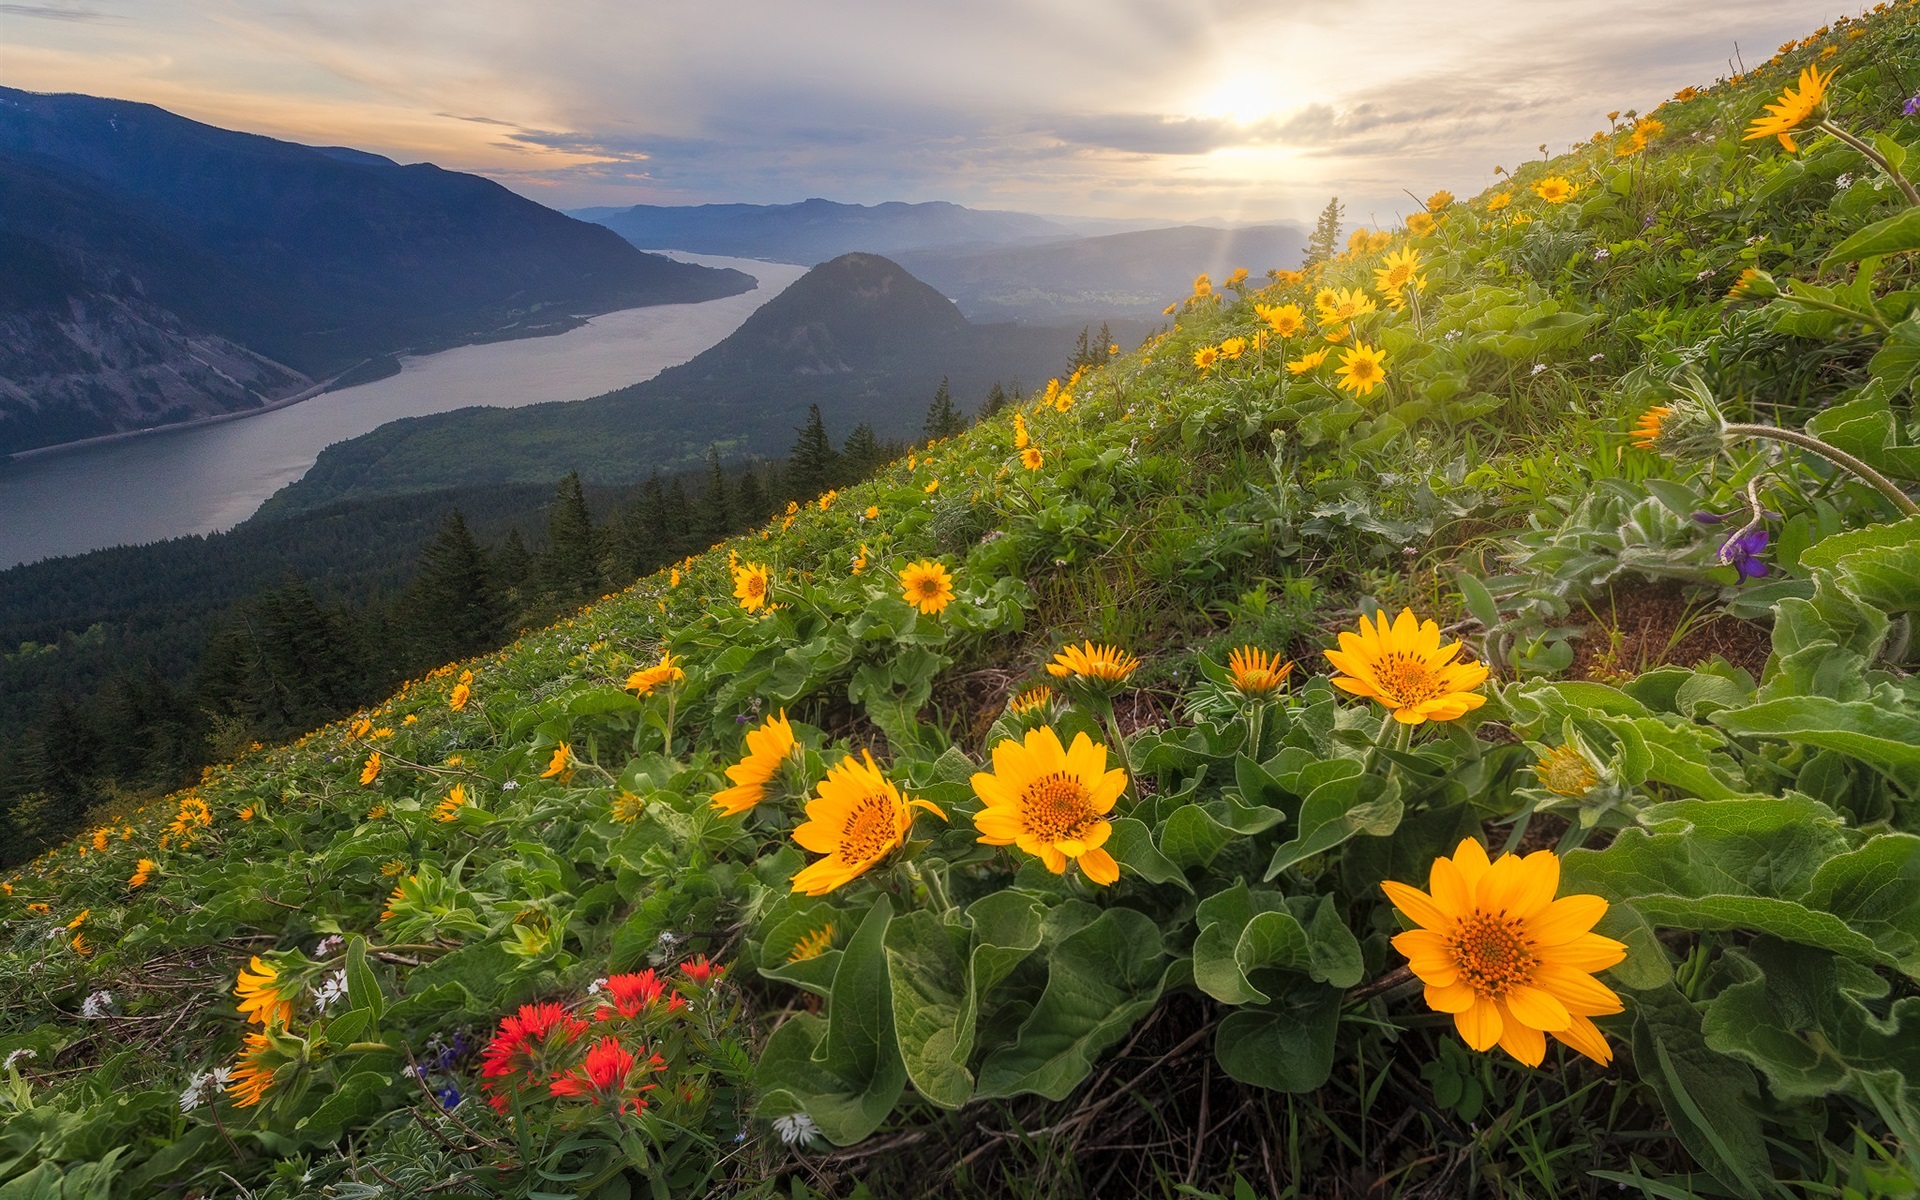 Wallpaper Dog Mountain, Yellow Flowers, Slope, Cascade - Mountain Range With River And Flowers - HD Wallpaper 